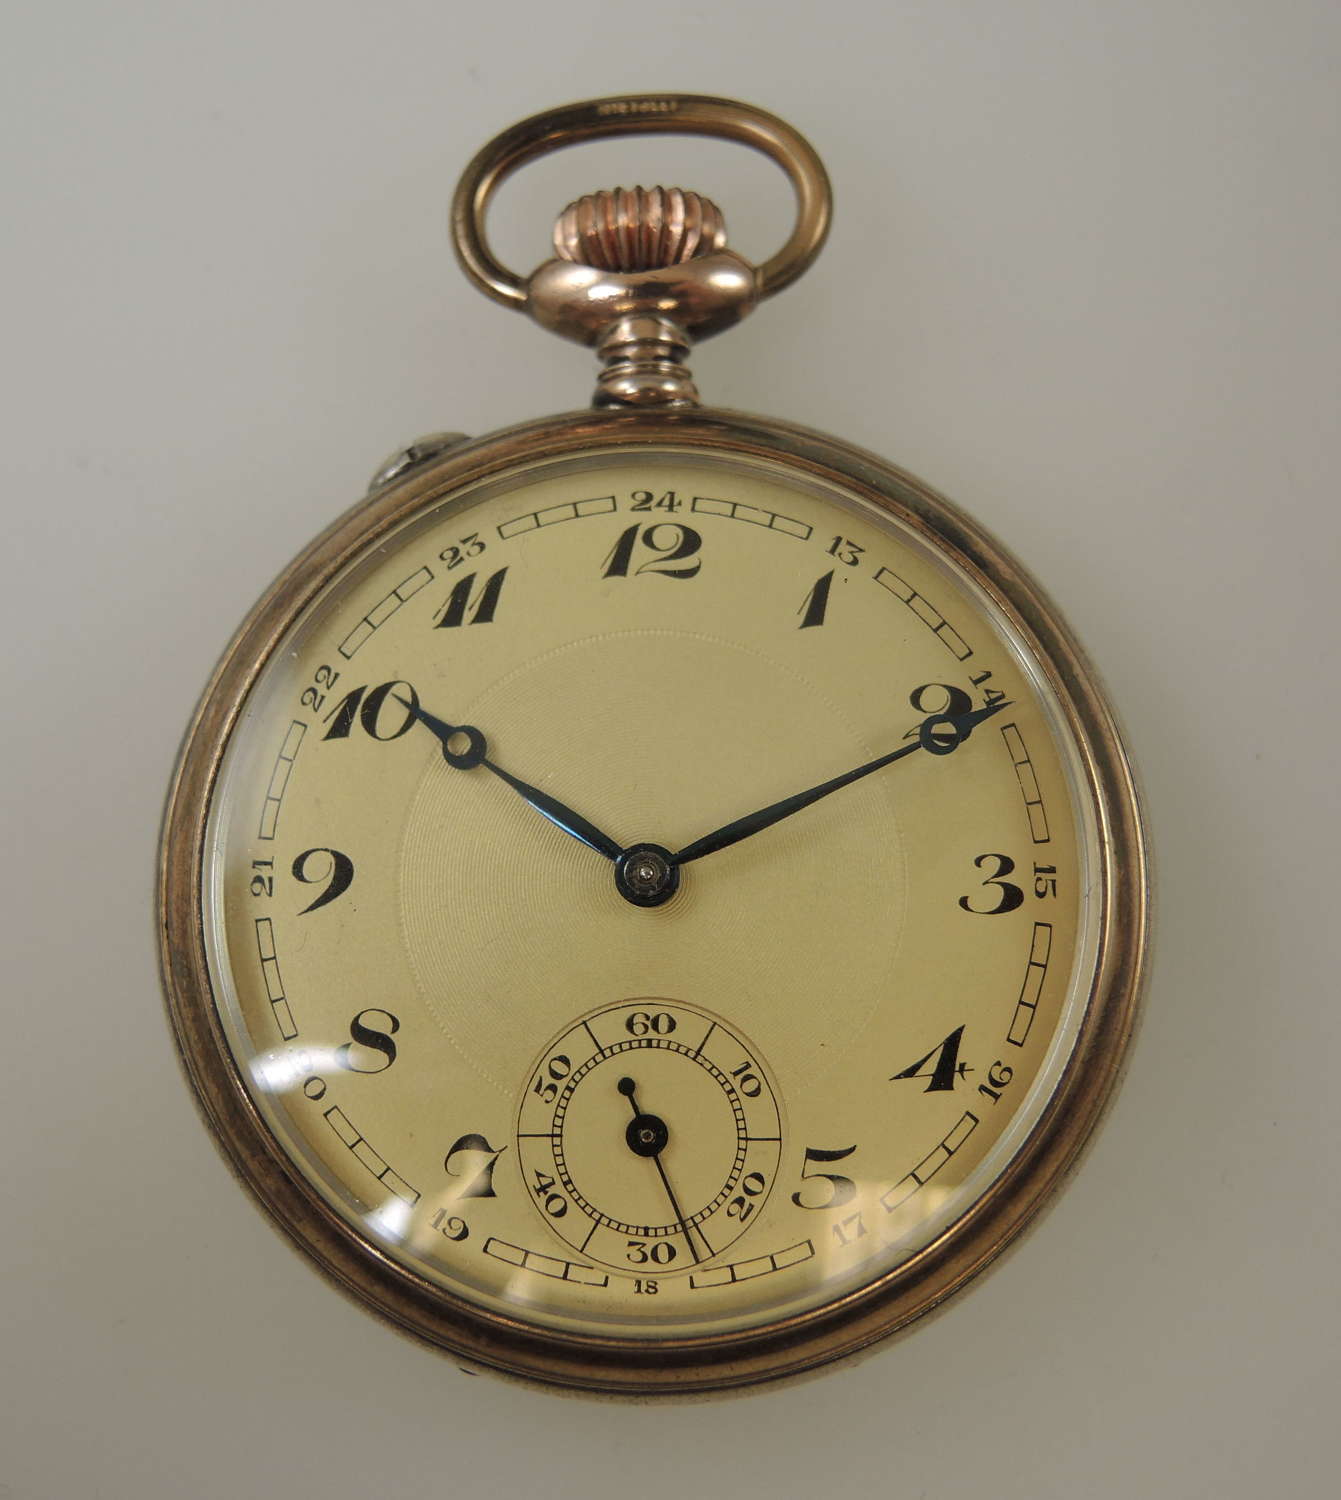 Superb example of a Junghans pocket watch c1900